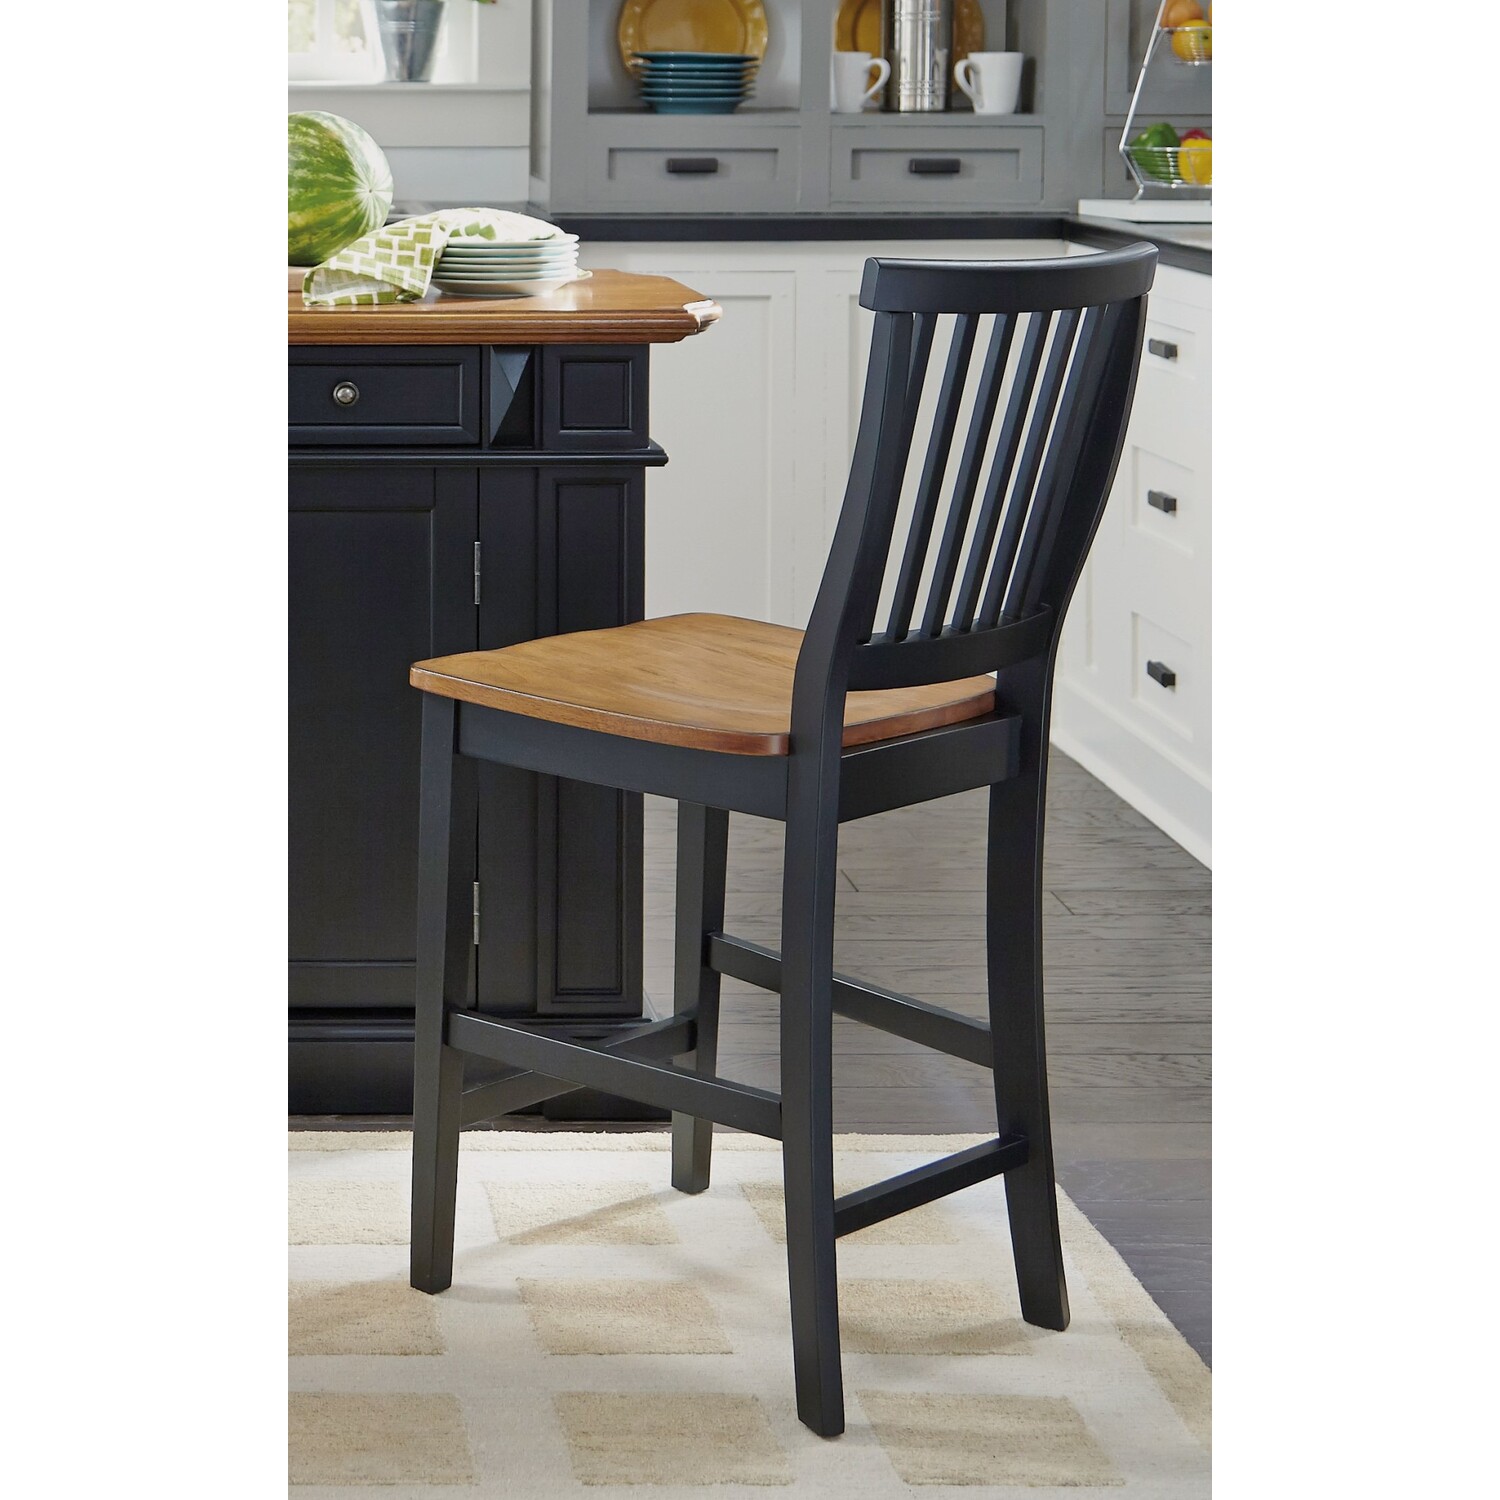 Home Styles Black Counter Stool with Oak Finished Seat - image 3 of 4